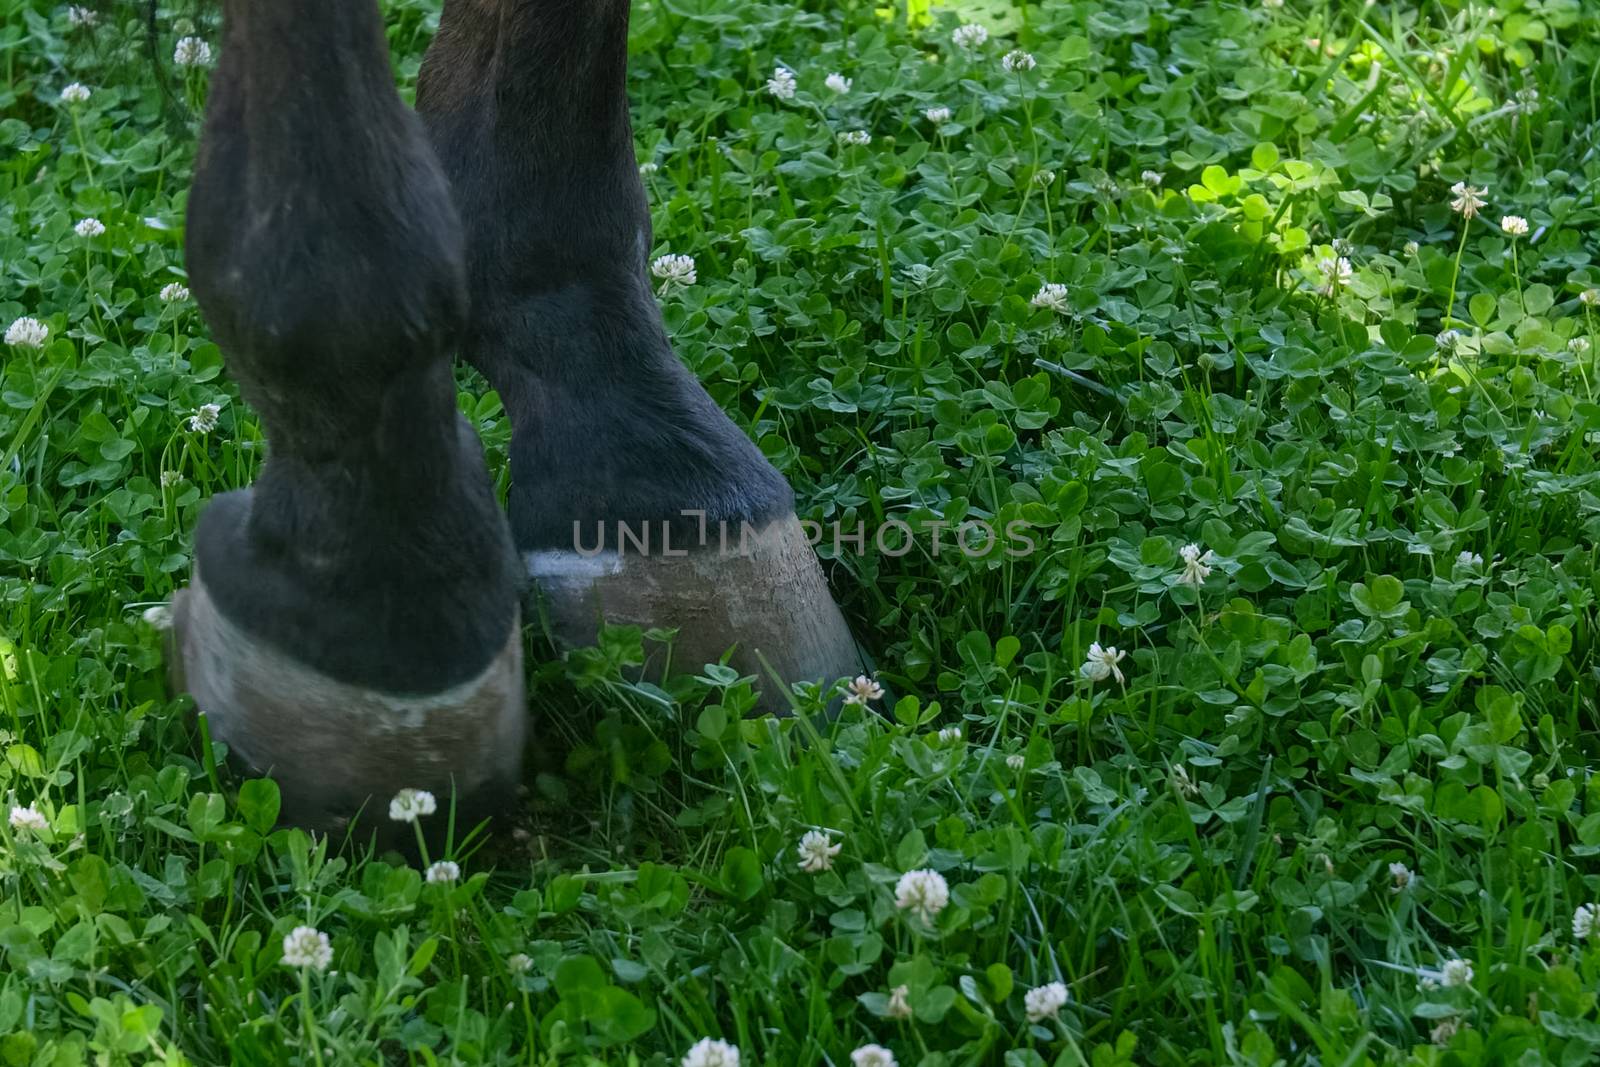 Horse hooves on the lawn. Horse grazing by nyrok